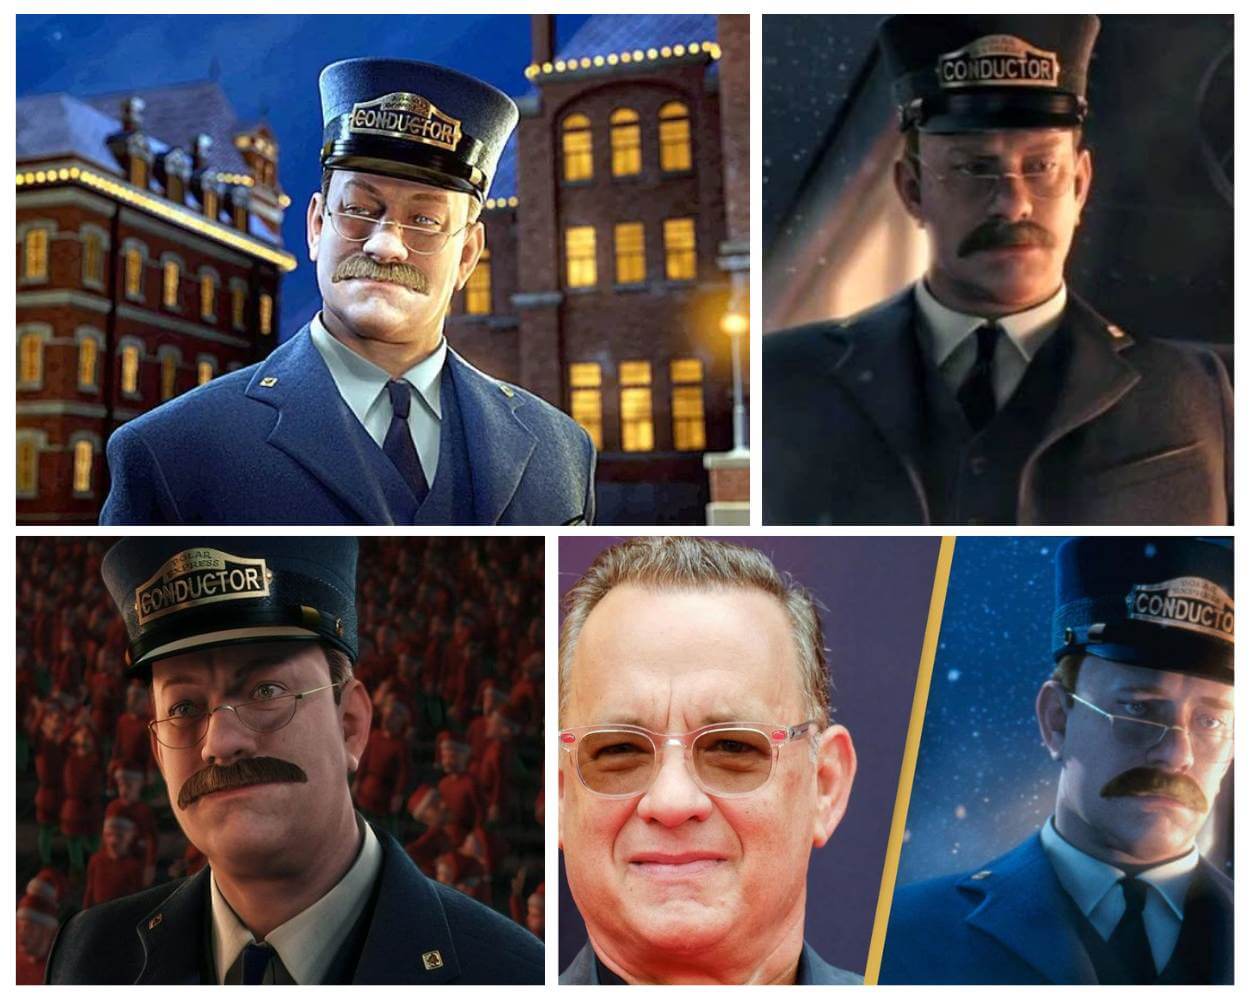 The Conductor - Voiced by Tom Hanks